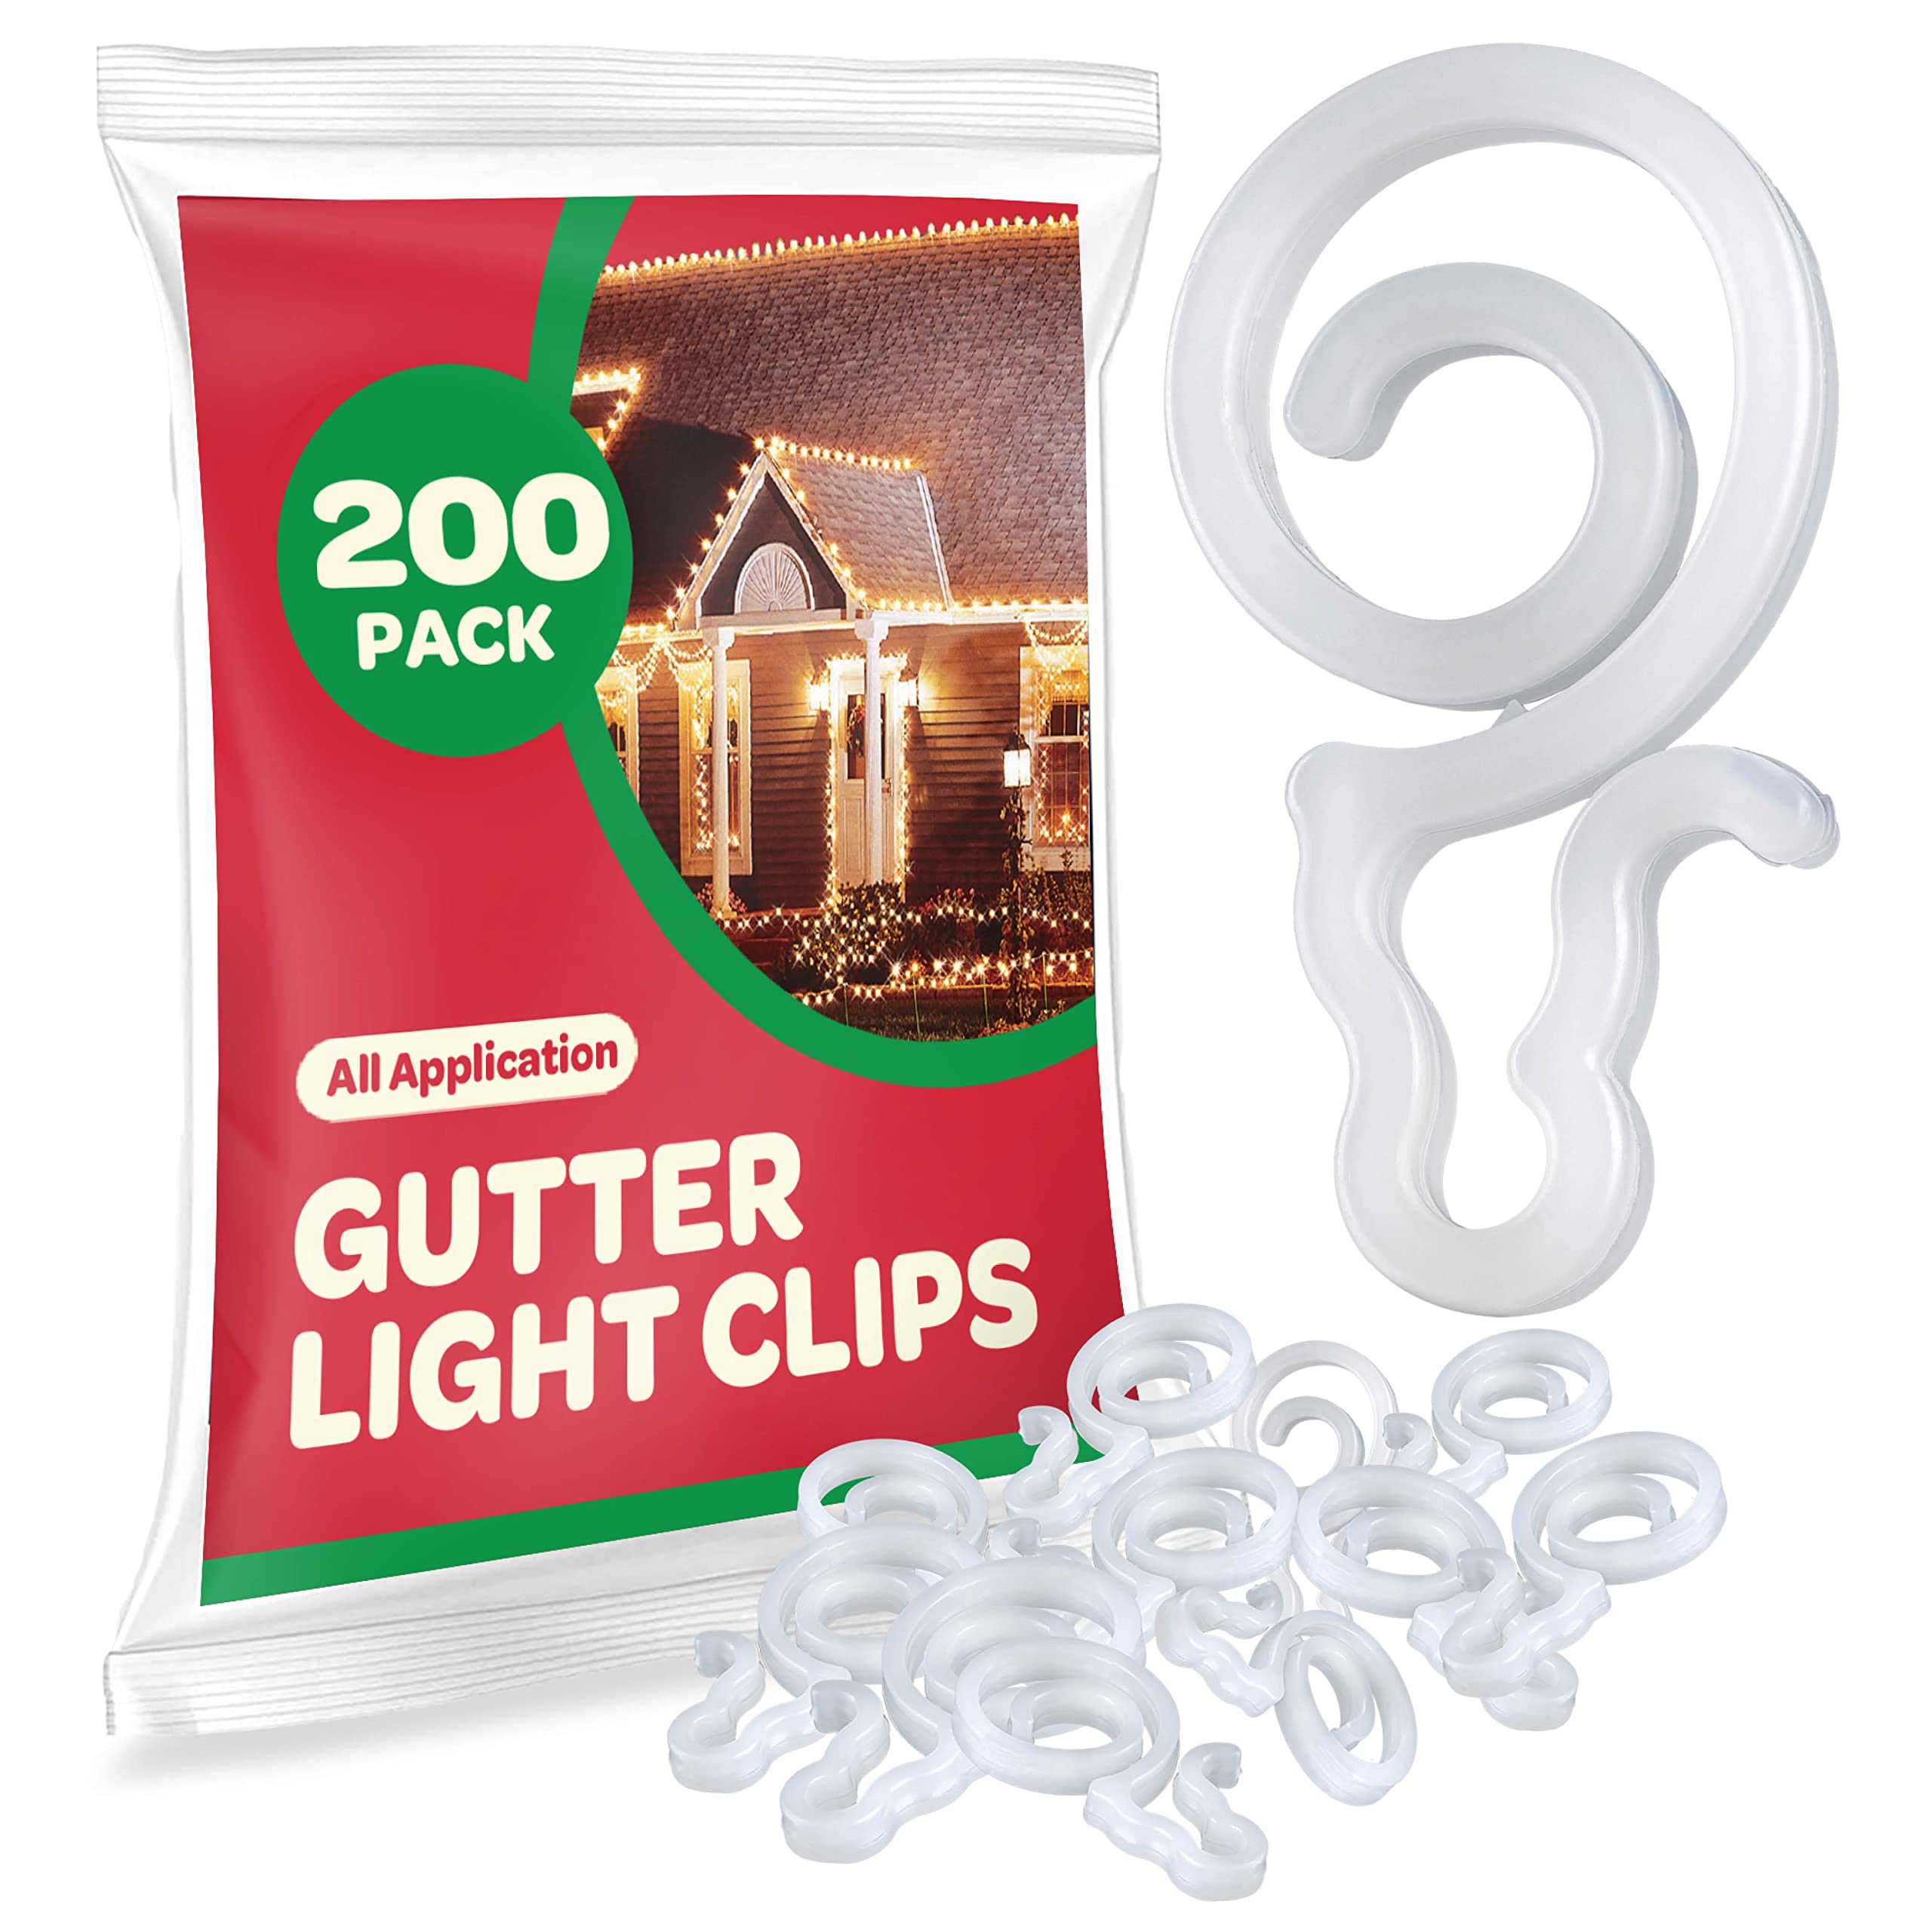 Gutter Light Clips [Set of 200] Gutter Light Clips, Hang By Cord All Type Outdoor Lights C5, C6, C7, C9, Mini, Icicle, Rope Lights. Christmas Light Clips Outdoor - No Tools Required - USA Made  - Very Good